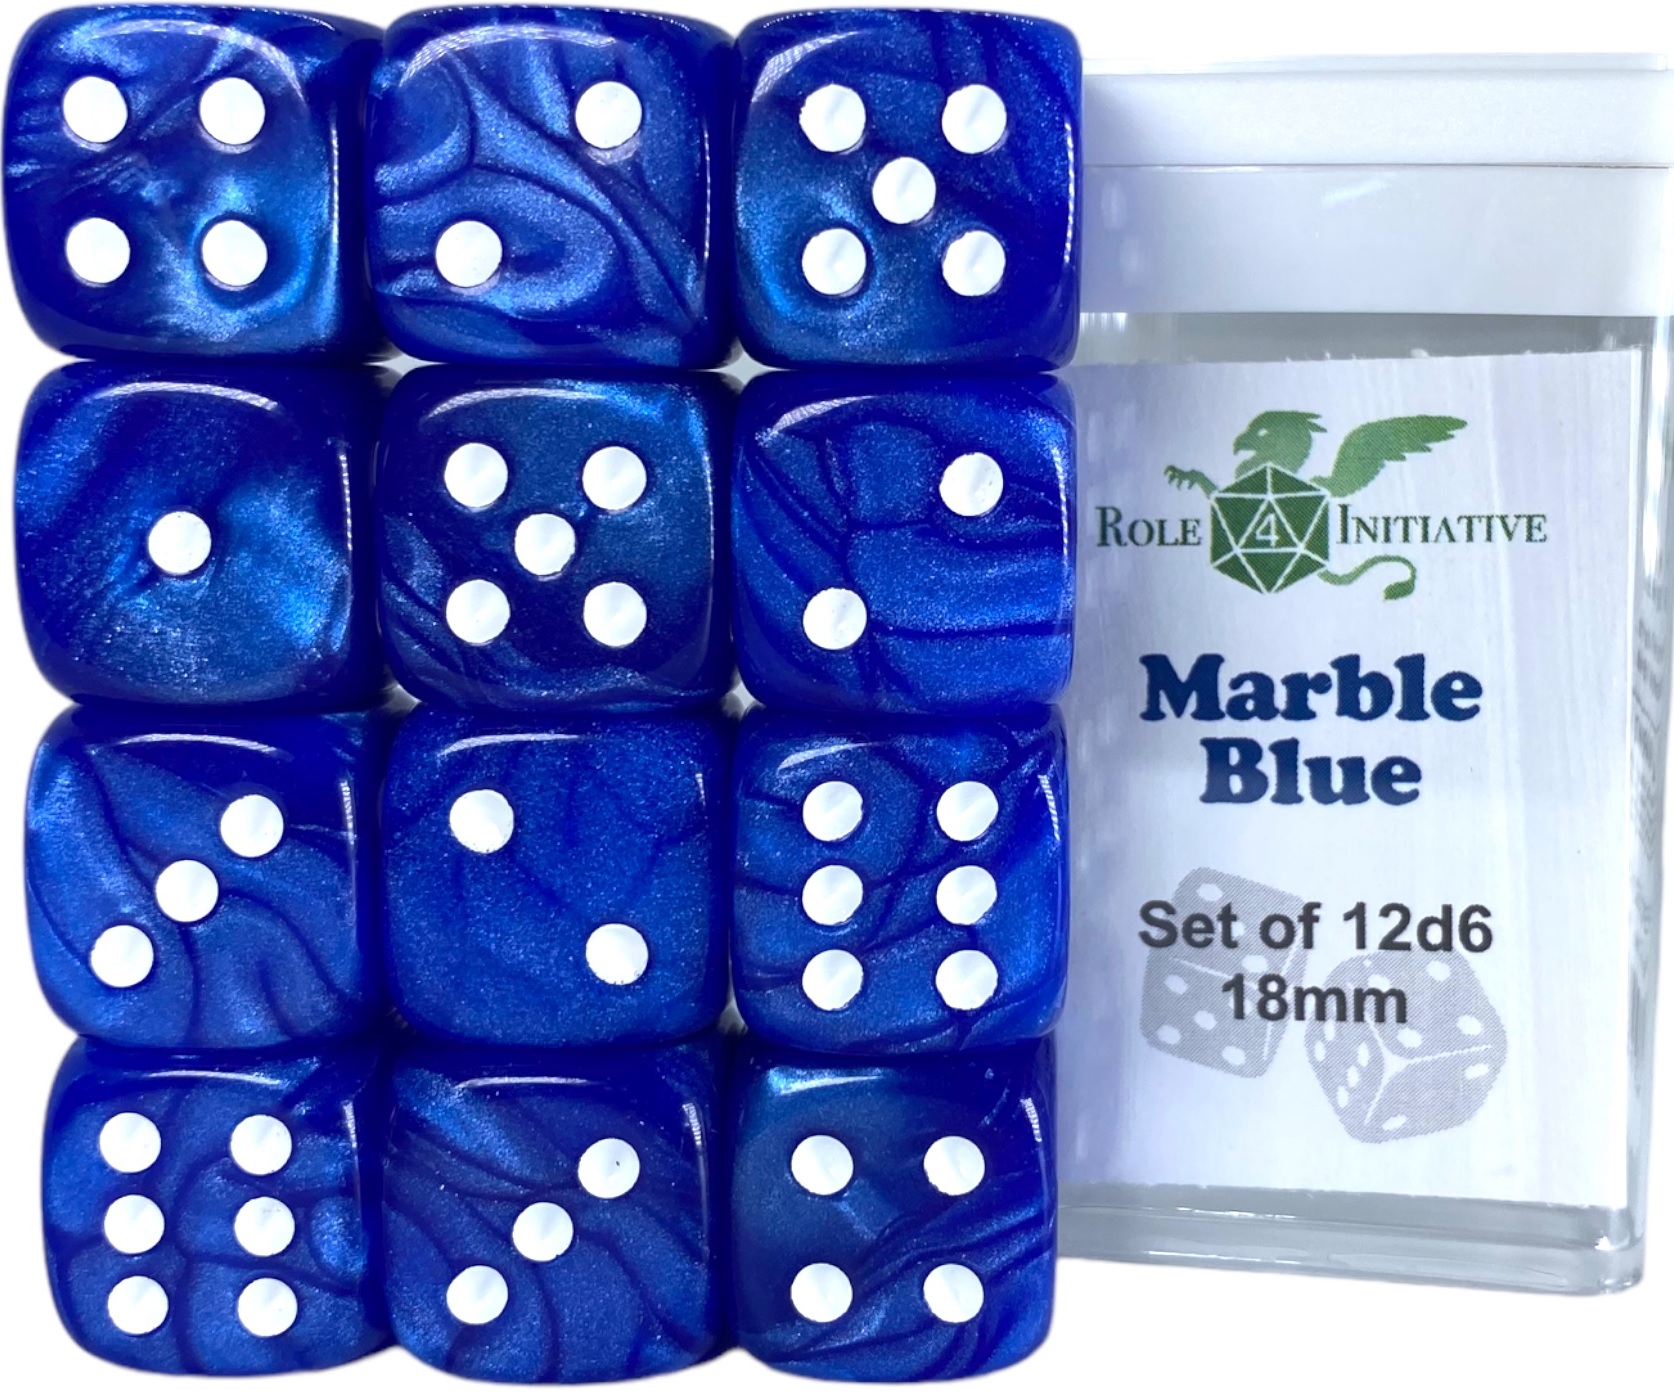 Role 4 Initiative: 12 D6 Pips Dice Set: Marble Blue 18MM 